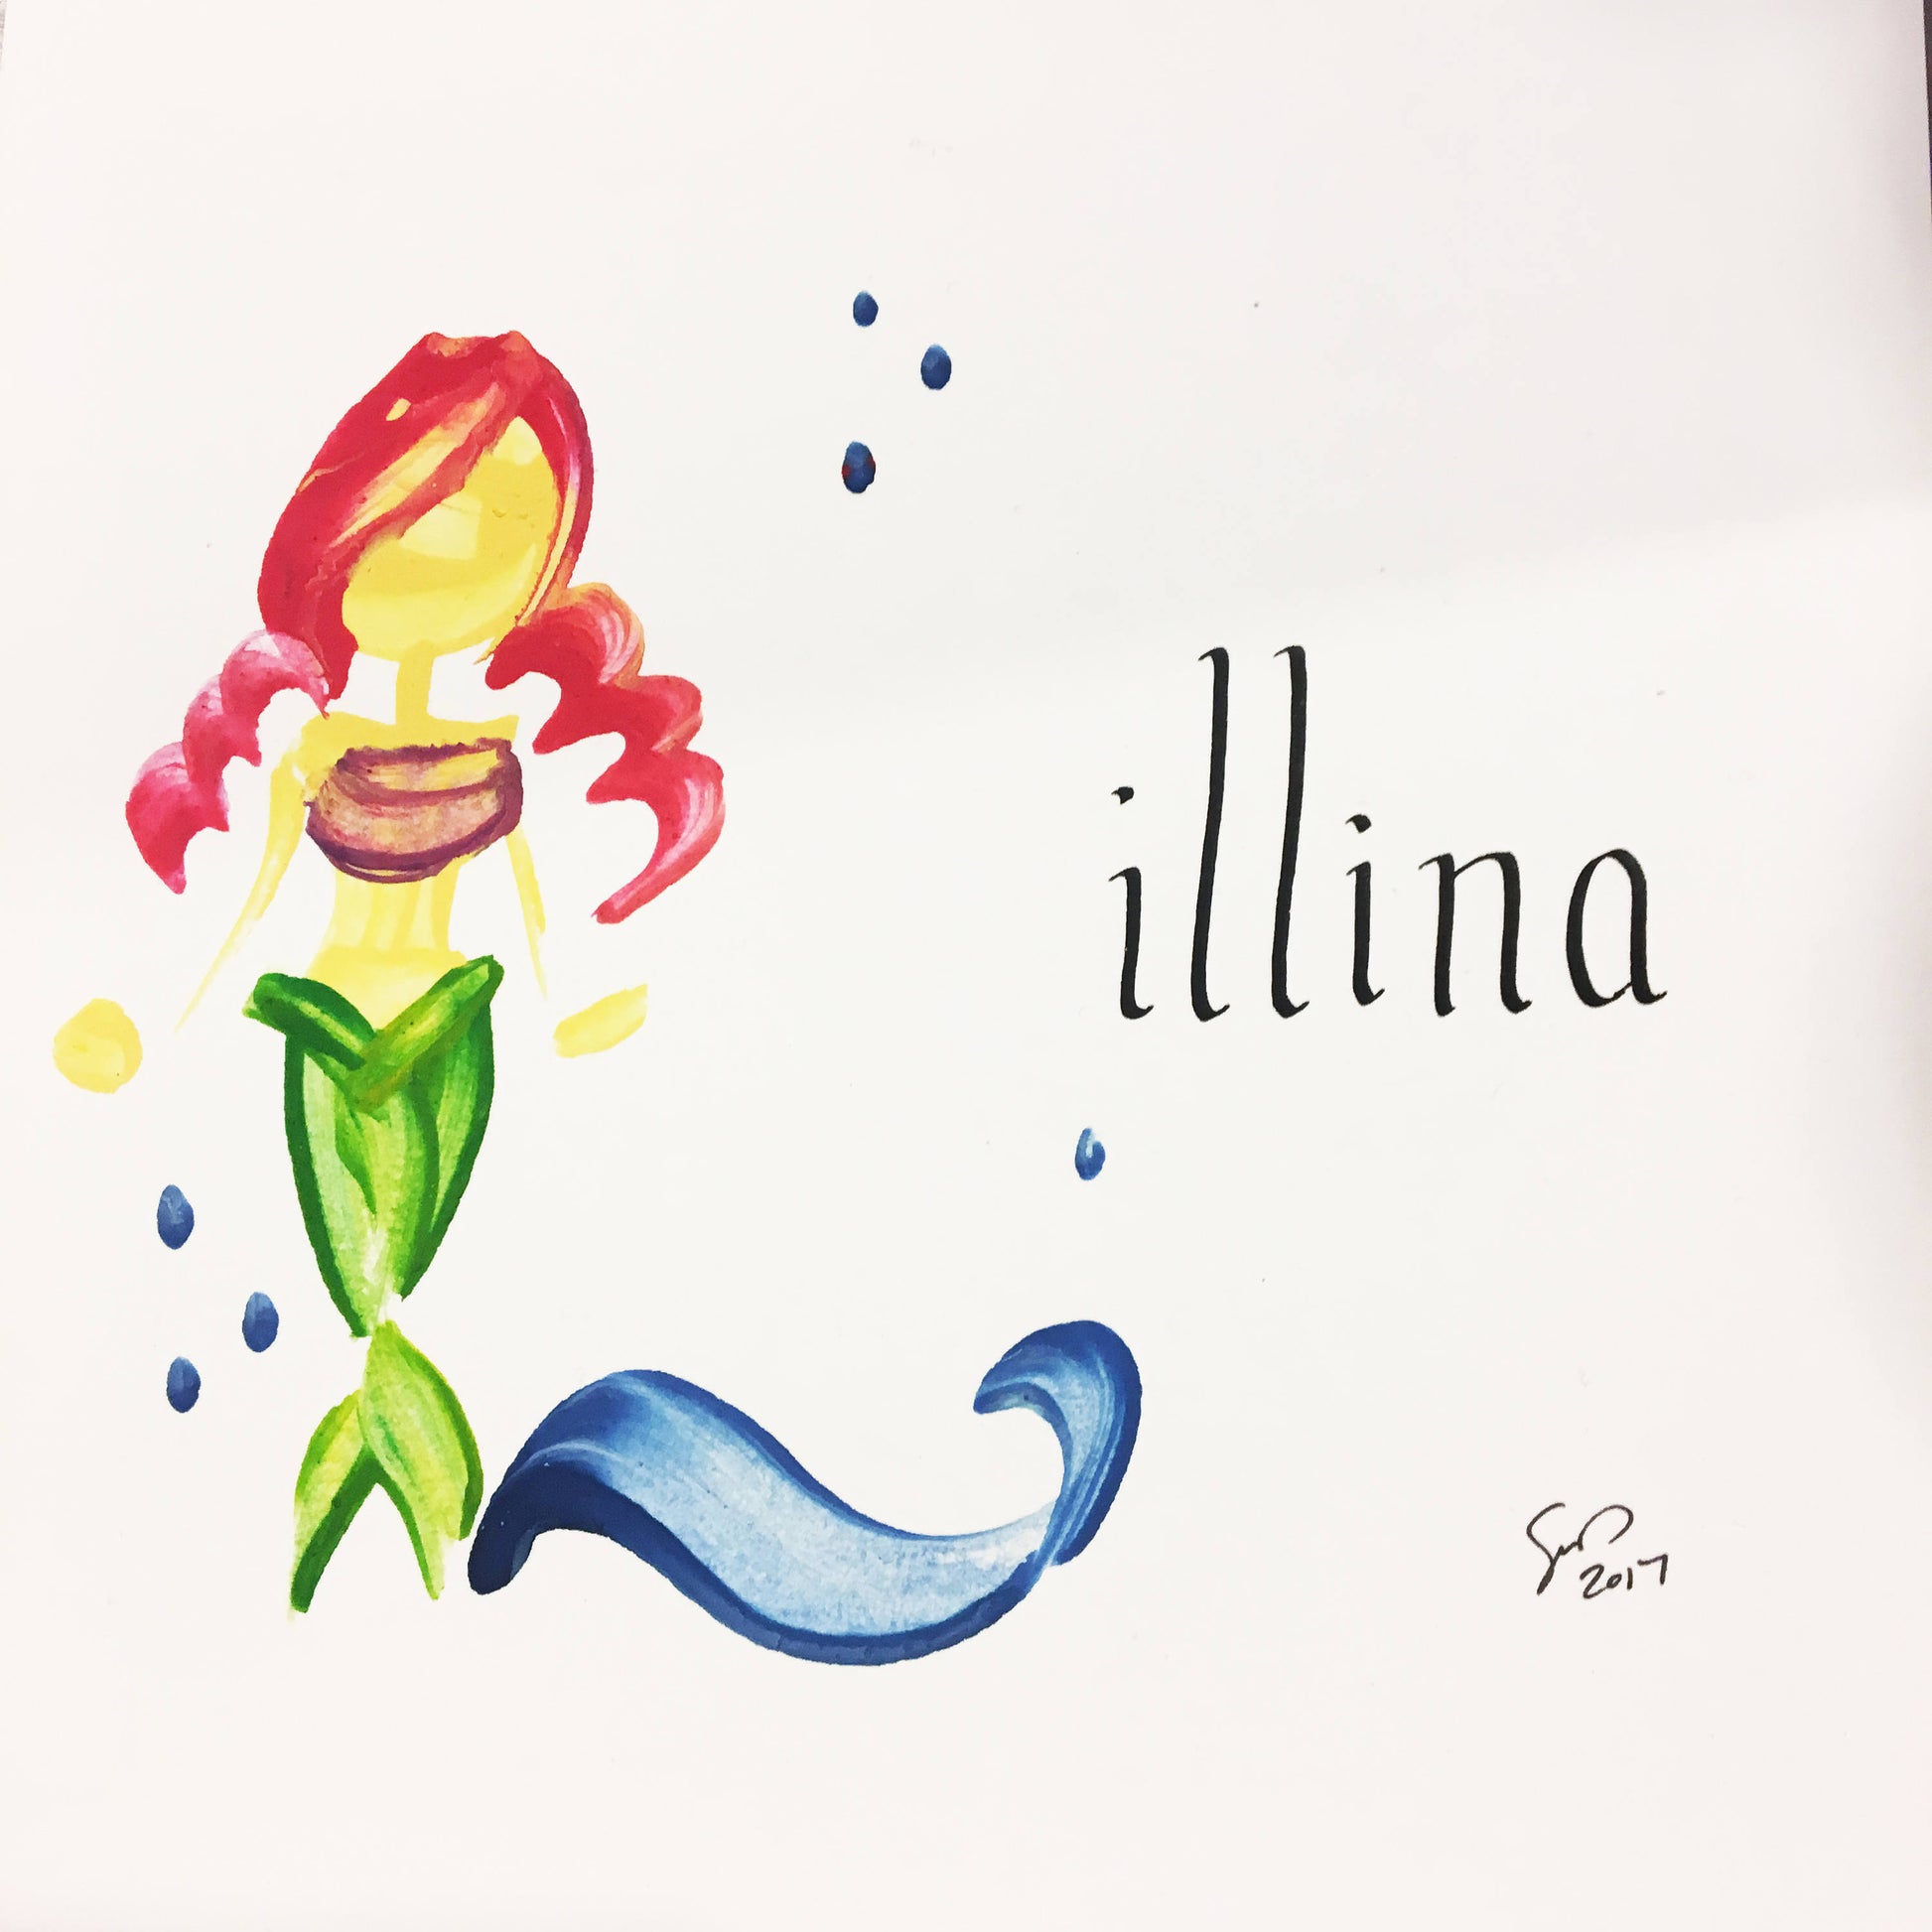 Single painted character of The Little Mermaid featuring the name "Lillina"